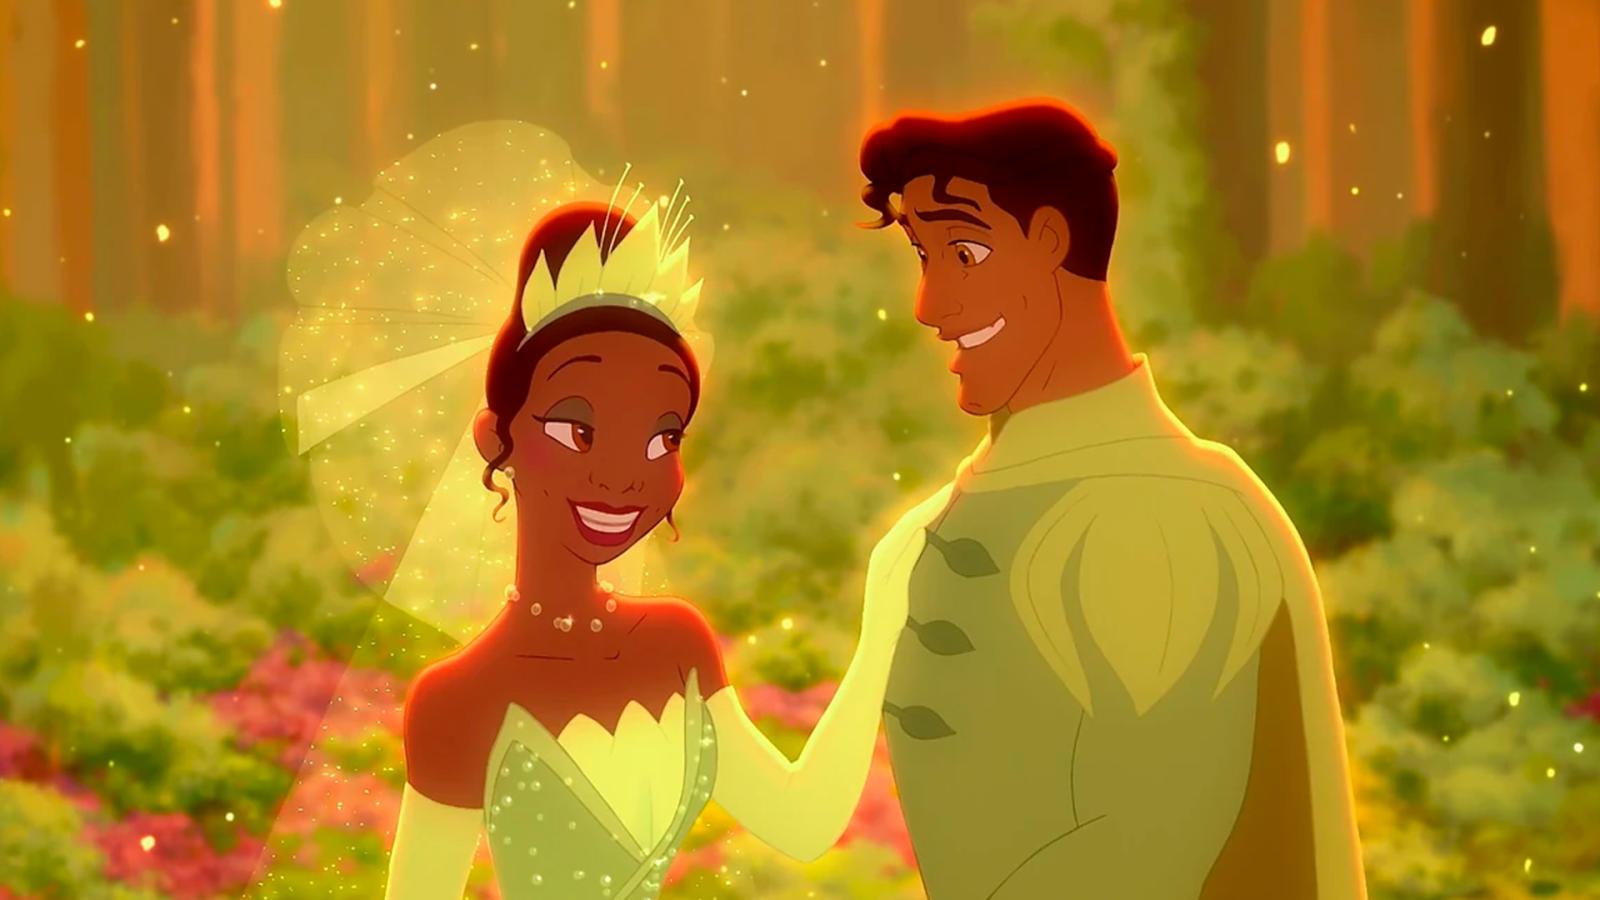 Green Flag Disney Couples That Clearly Outshine Toxic Princess Love Stories, Ranked - image 2